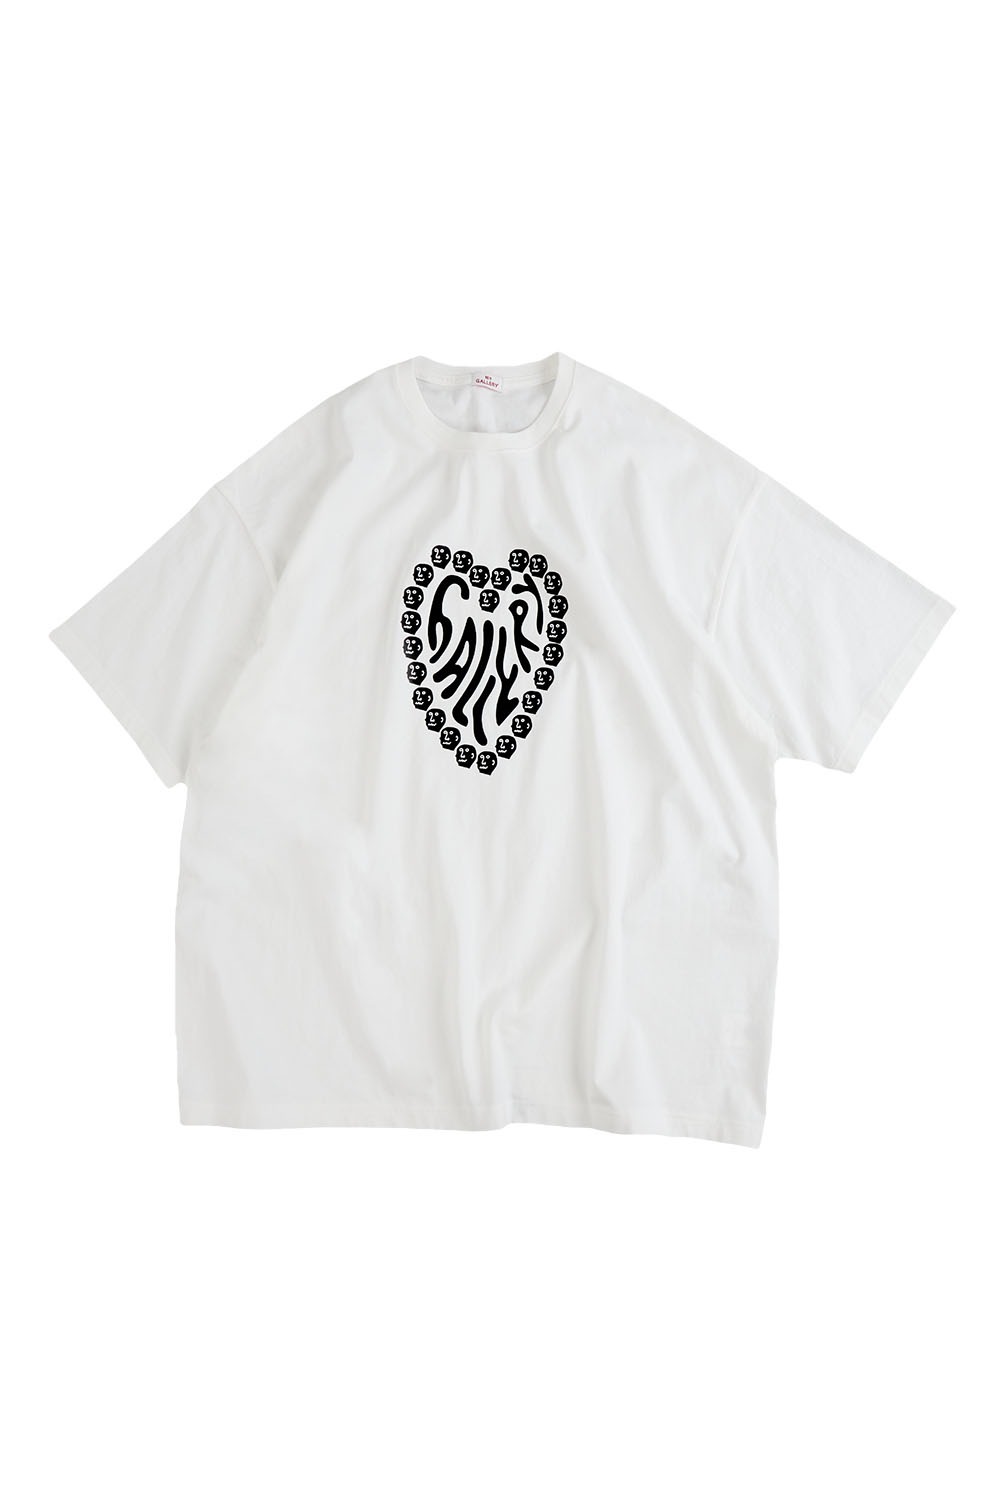 Gallery Overfit Heart Face T-shirt - White